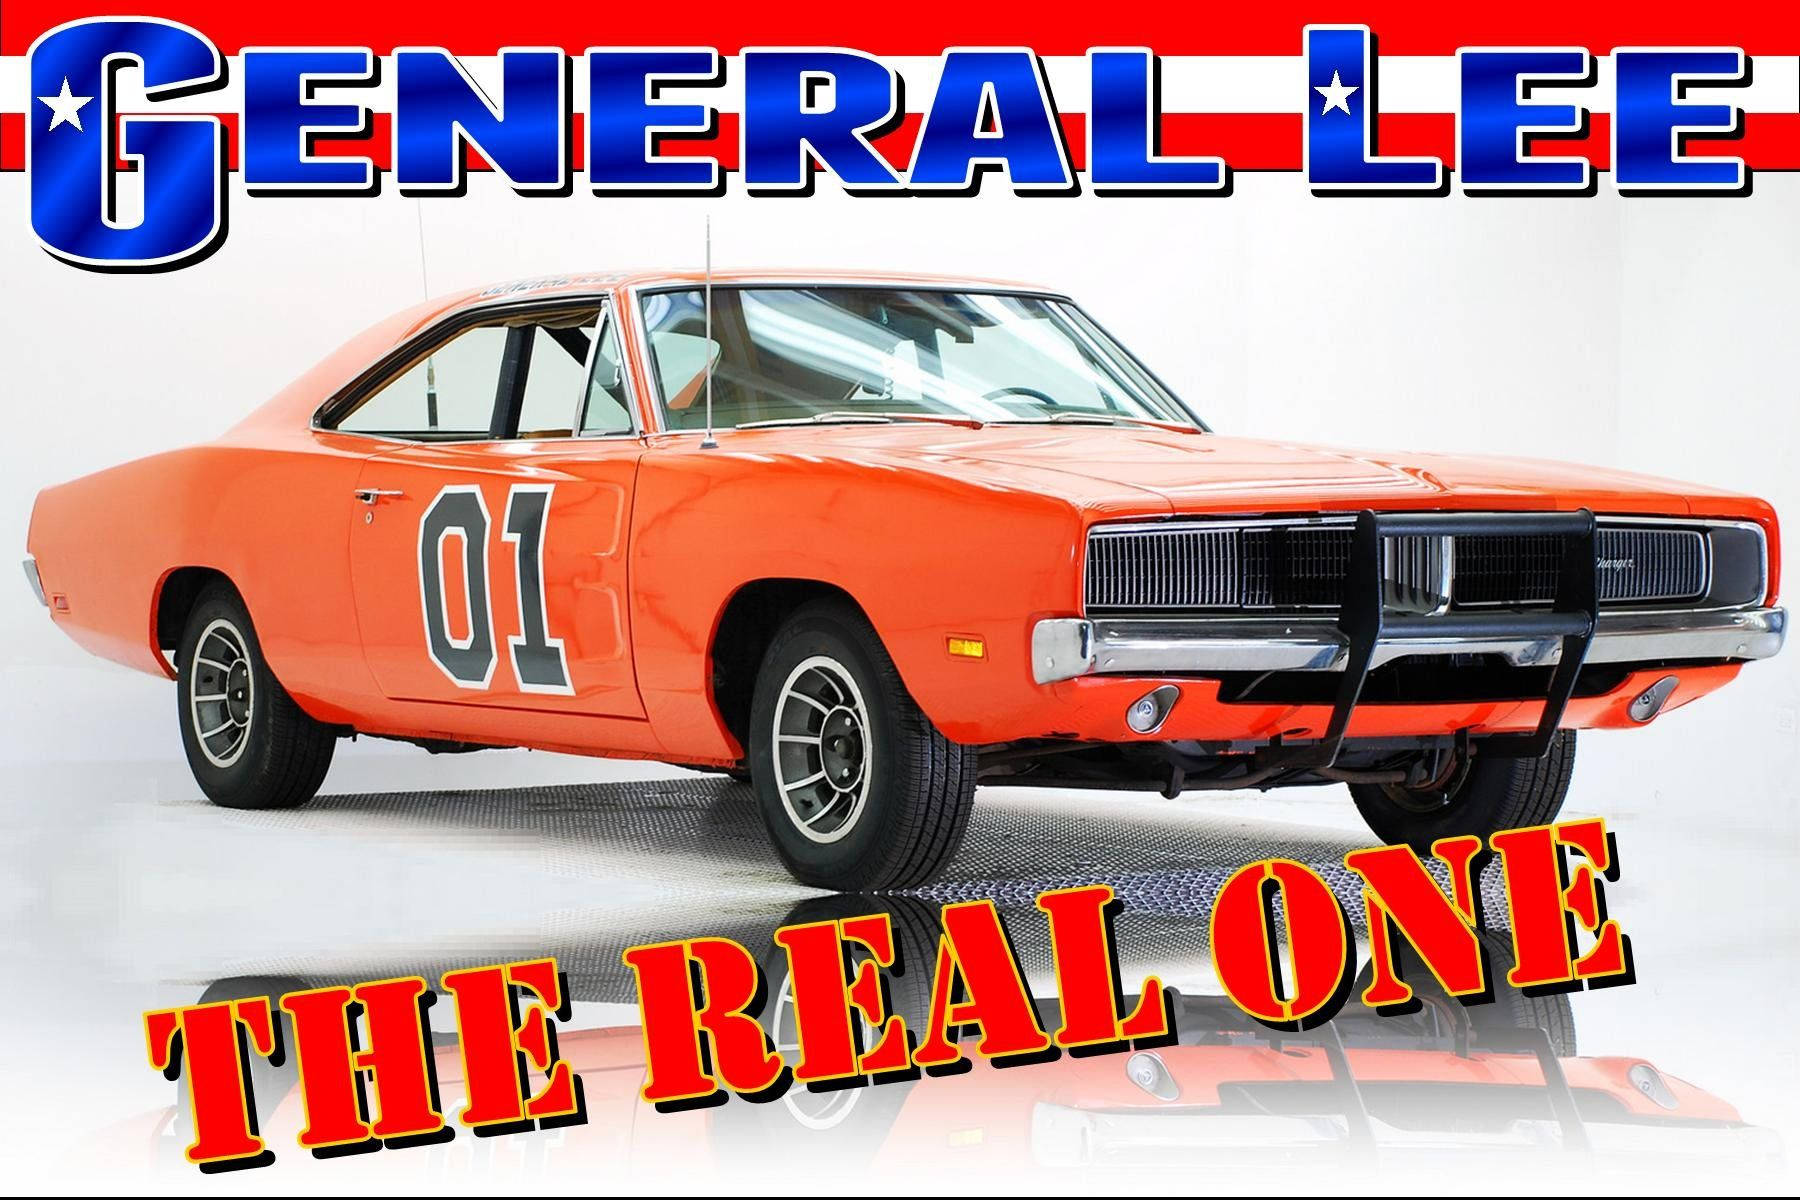 The Real One - General Lee Wallpaper